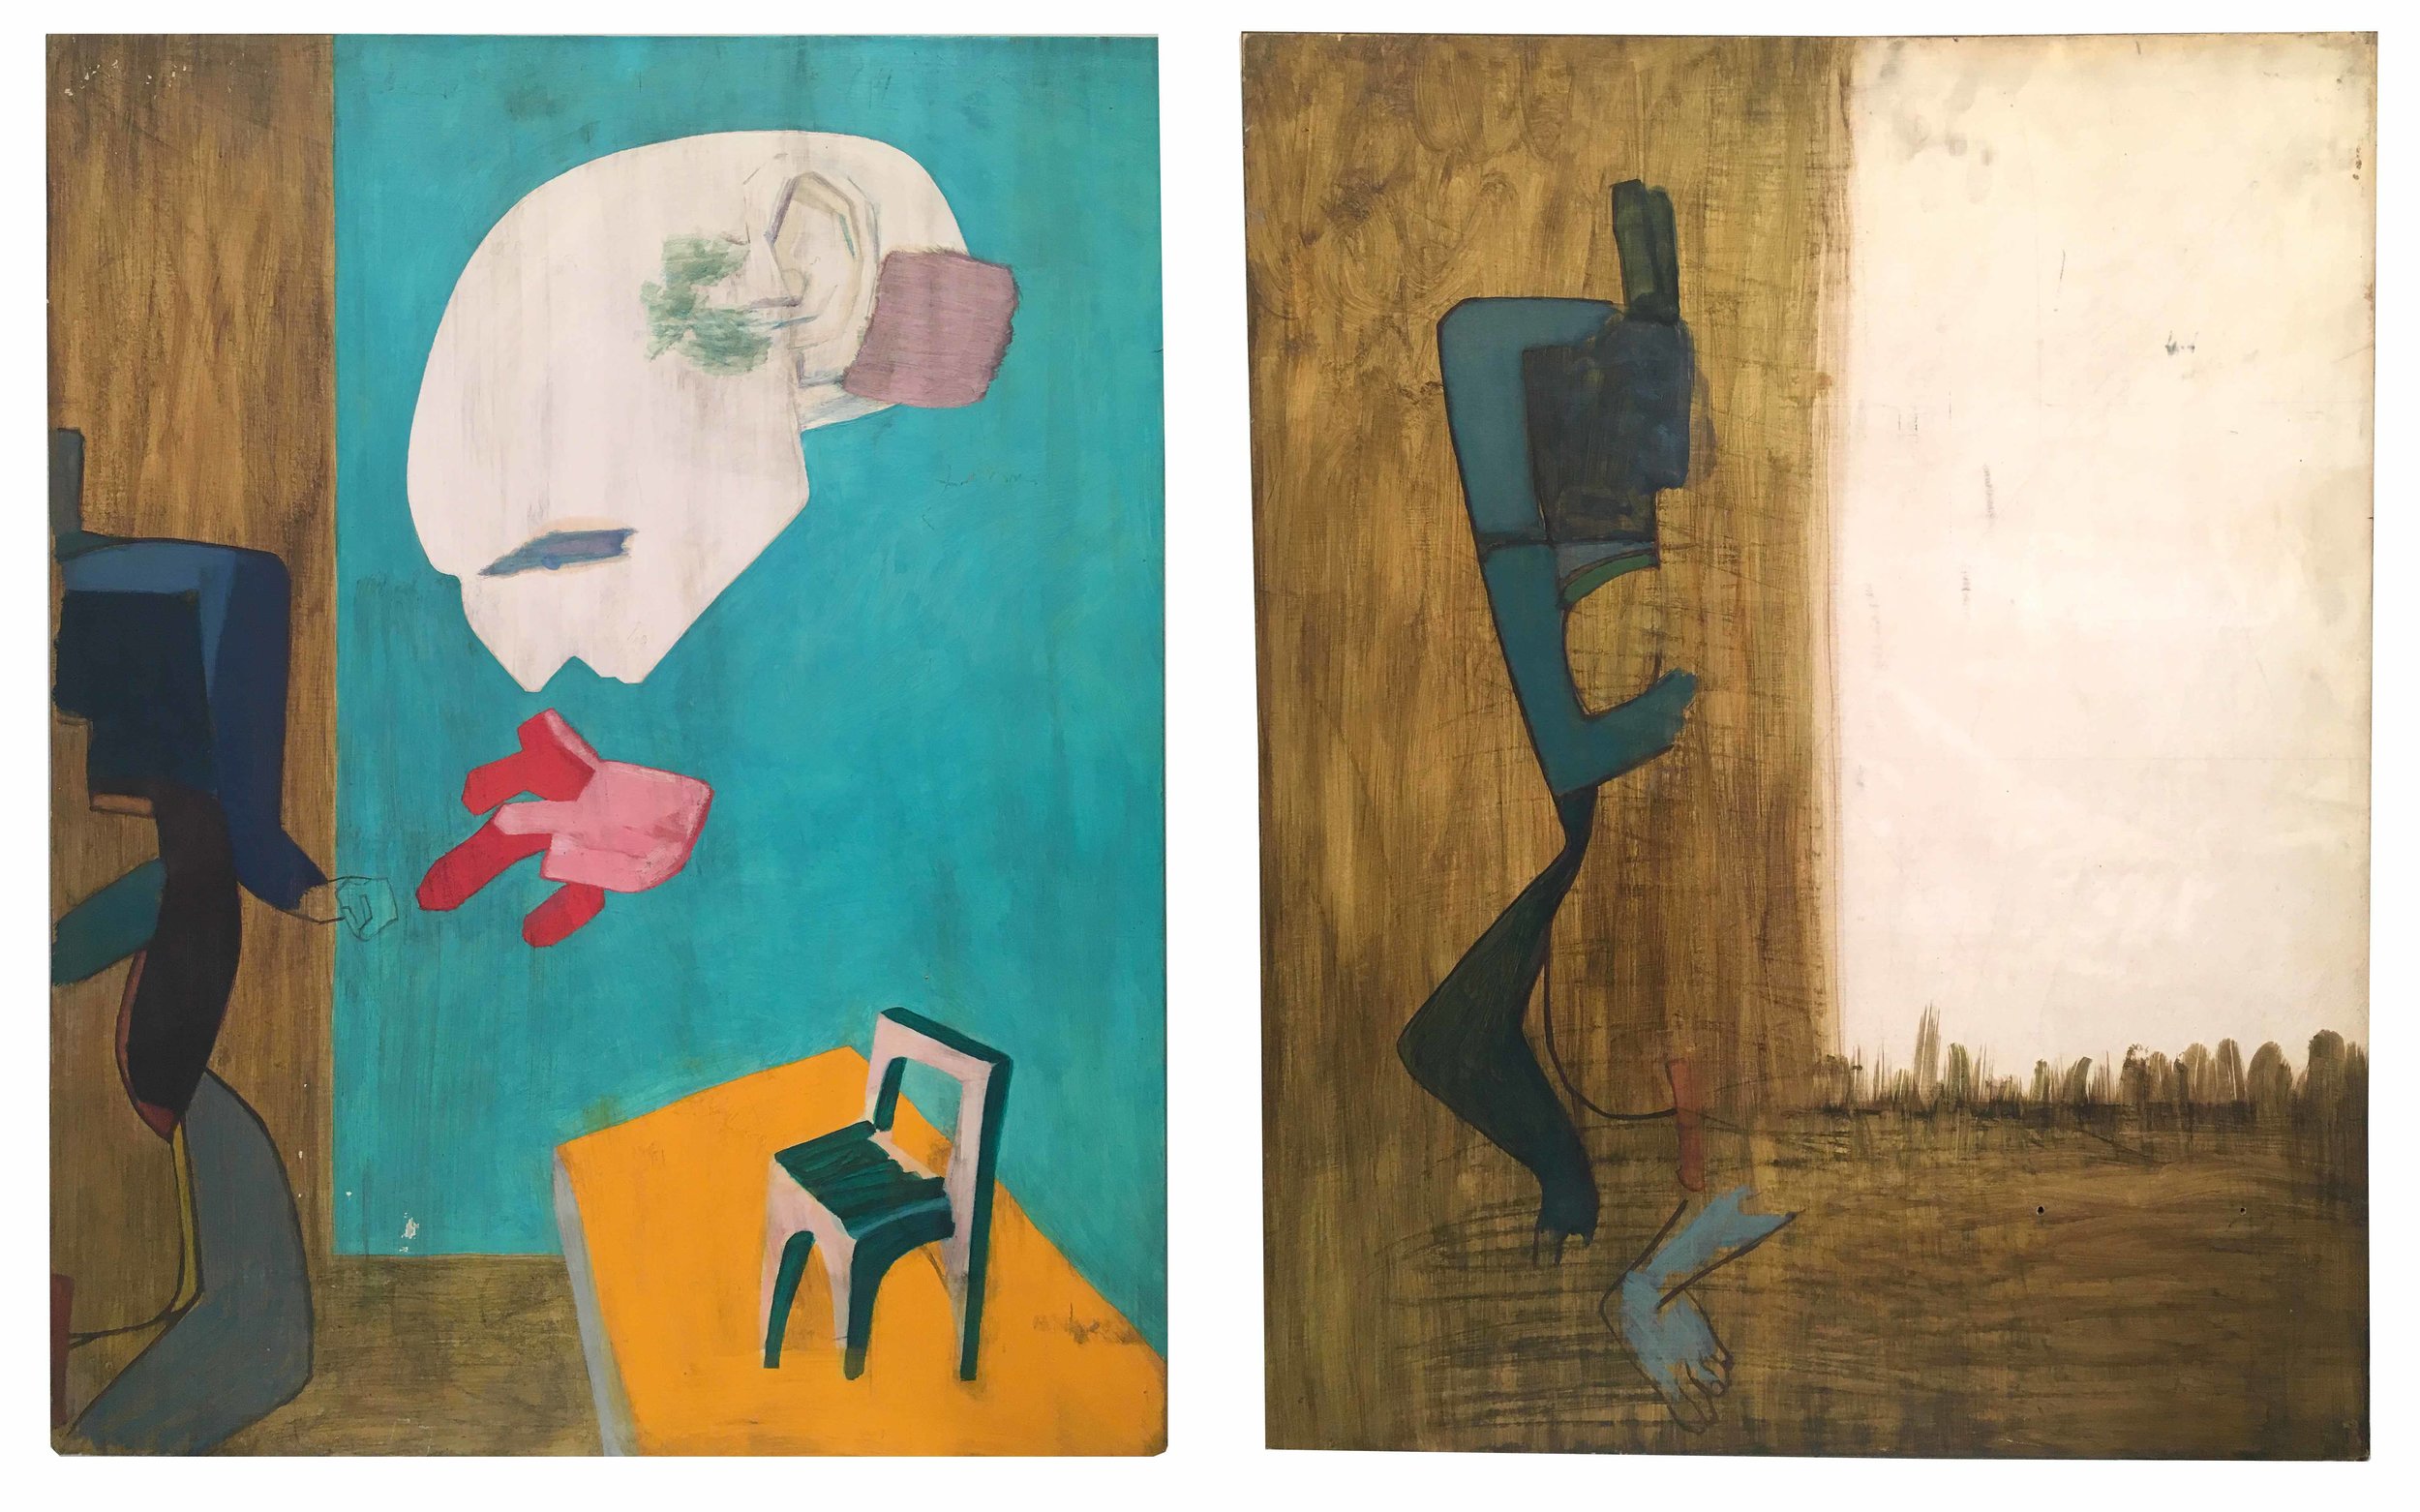   Frederick Kiesler  (1890-1965)  Portrait Galaxy of Charcot , 1949 Tempera and oil on paper mounted on wood Two panels mounted together in one frame: Panel A: 28 9/16 x 22 7/16 inches (72.5 x 57 cm) Panel B: 28 1/2 x 22 7/16 inches (72.4 x 57 cm) Co